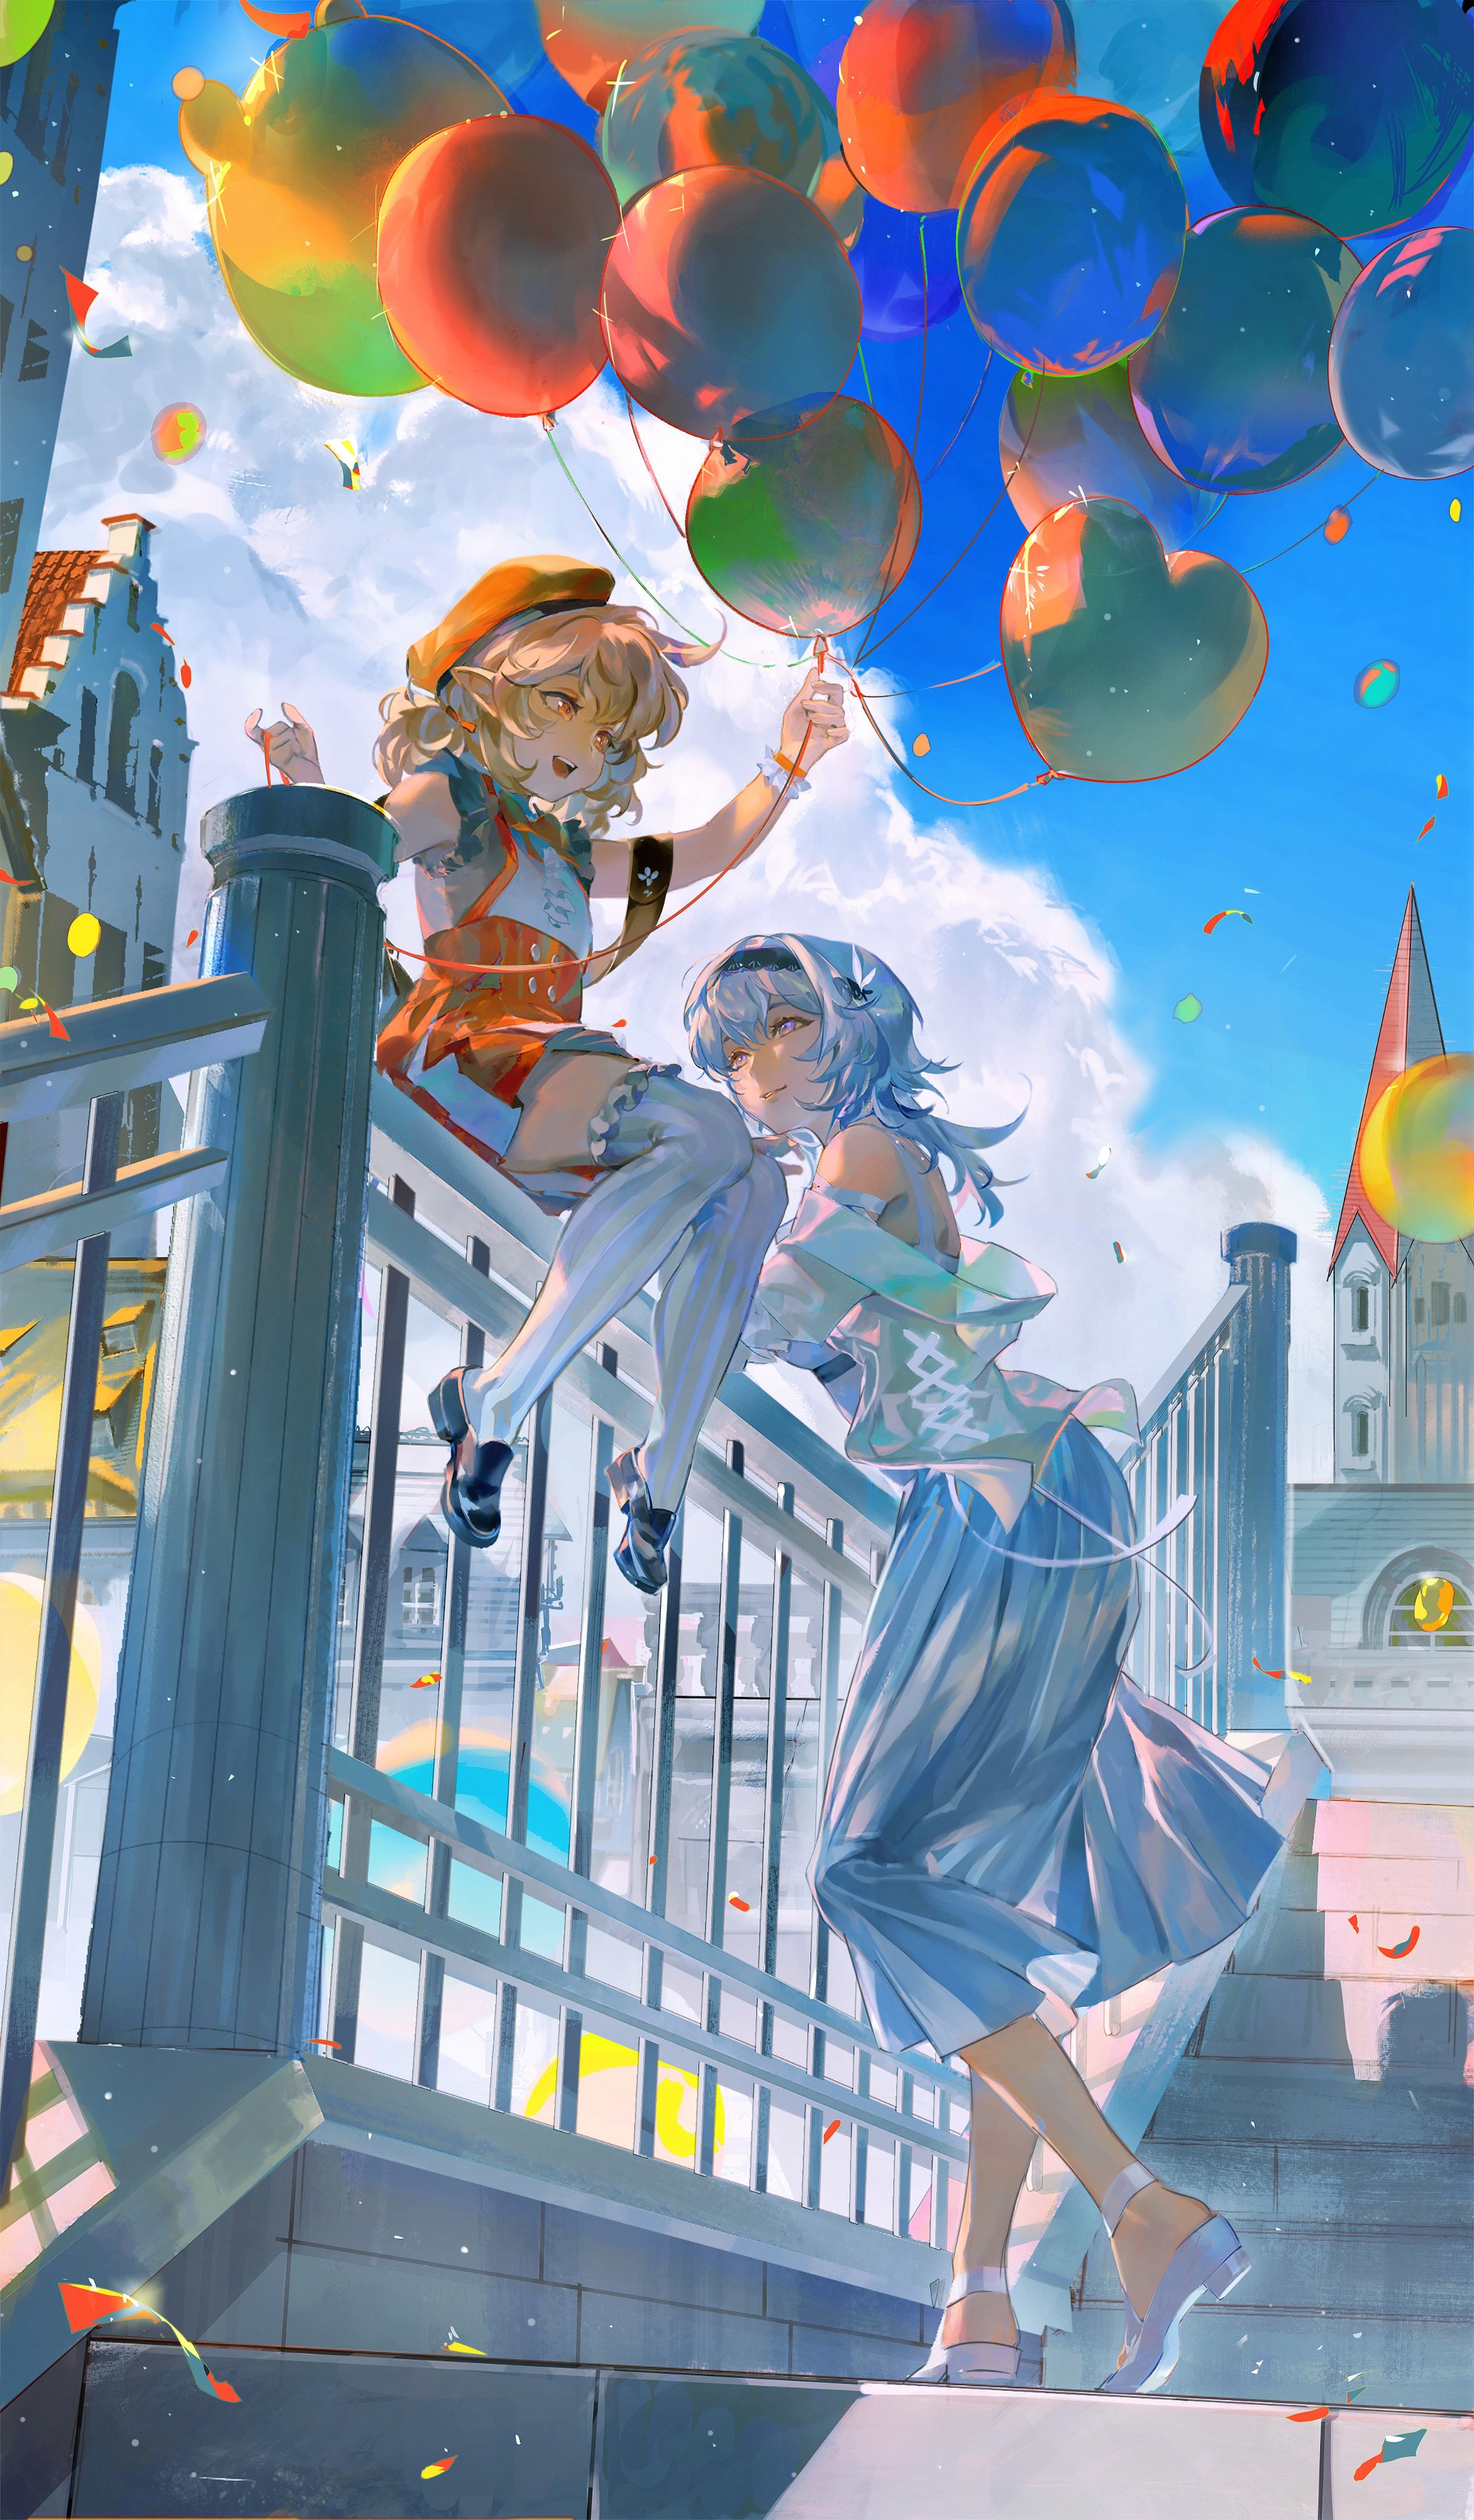 Anime 2396x4096 Genshin Impact balloon Eula (Genshin Impact) sky portrait display anime girls Klee (Genshin Impact) hat confetti white dress dress hair ornament outdoors pointy ears stairs railing sitting blue dress high heels low-angle clouds building stockings drinkdrink thigh-highs city light blue hair long hair blonde twintails hairband